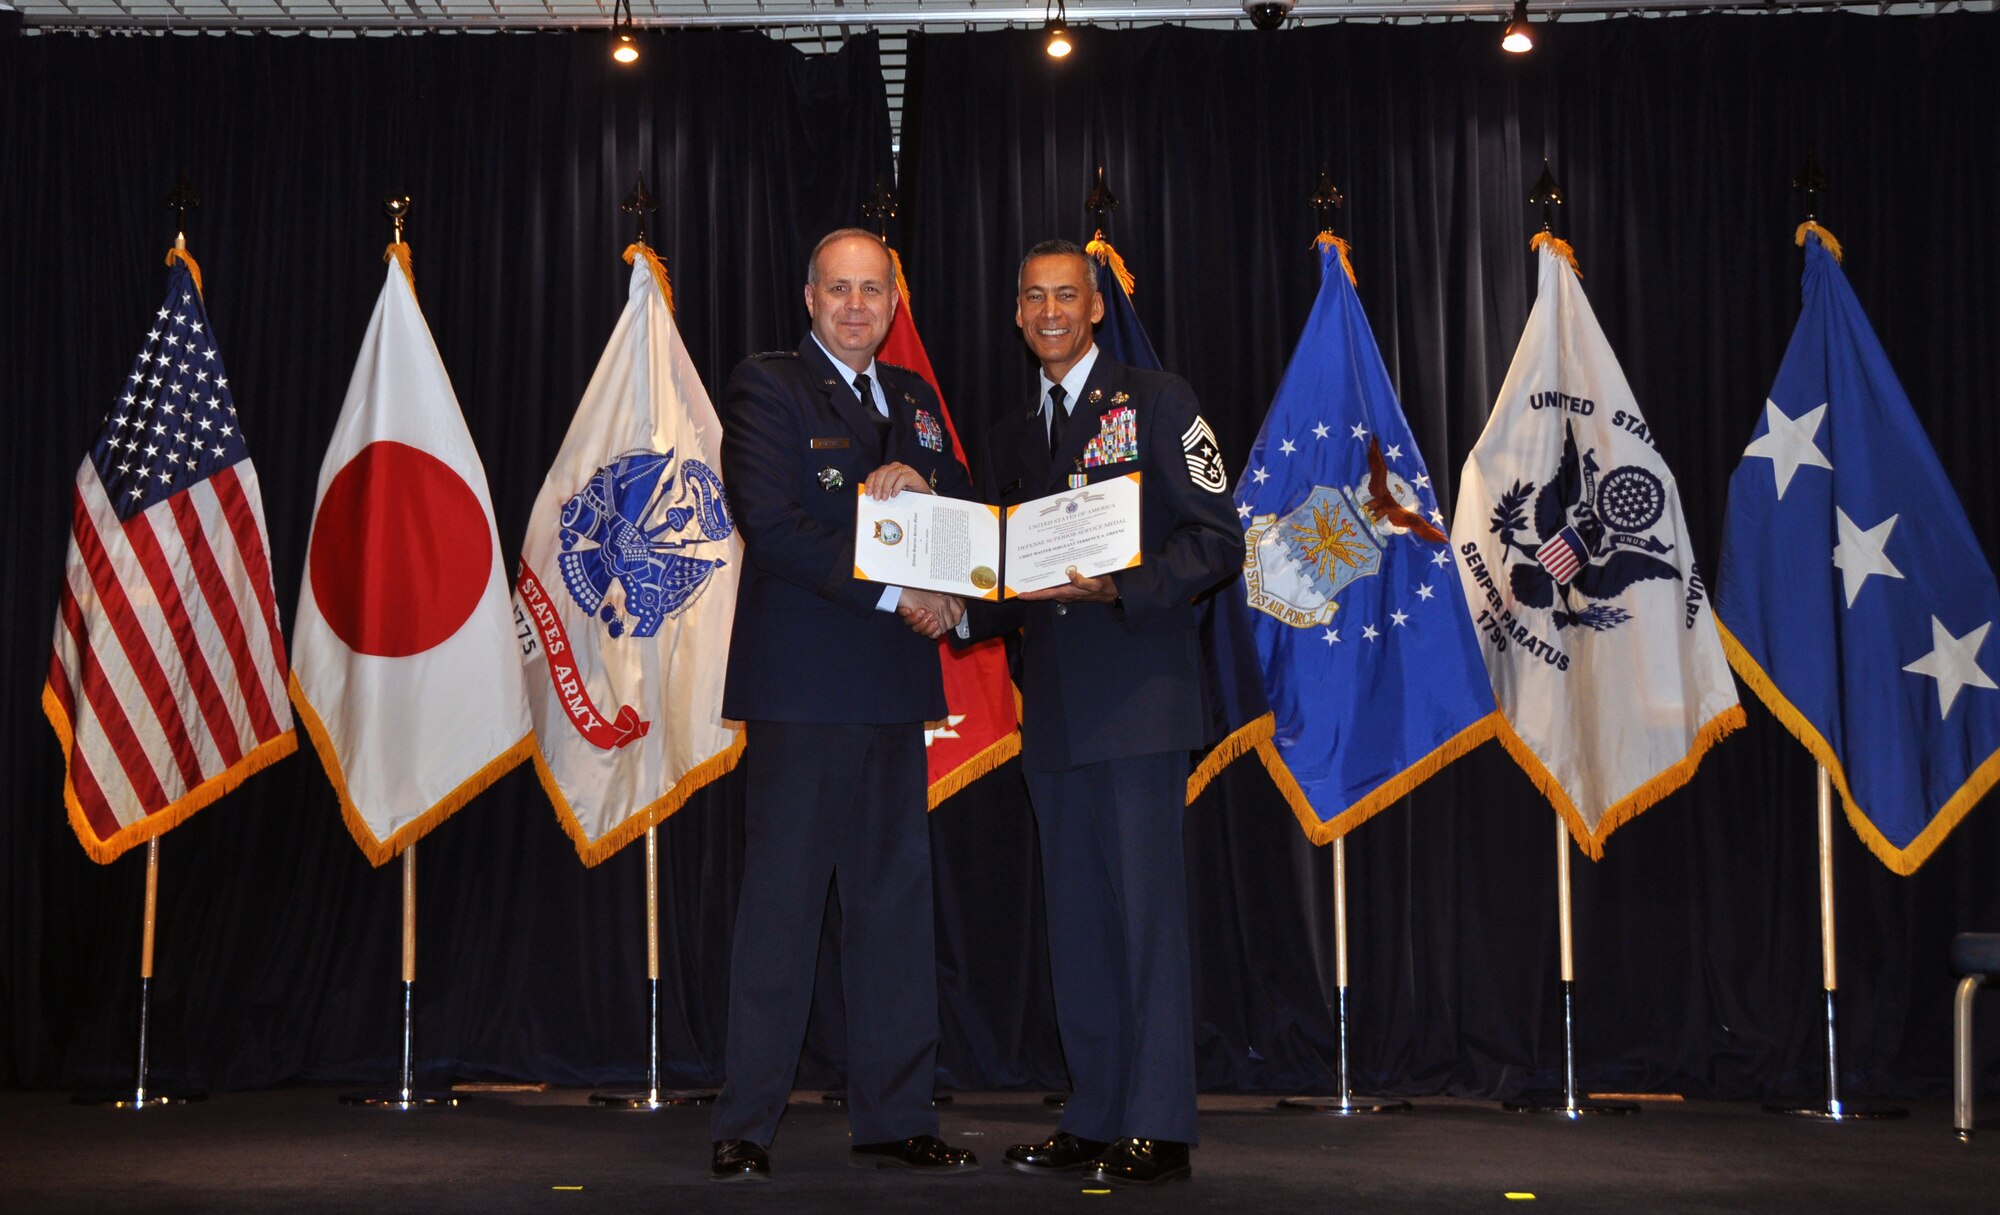 Chief Master Sgt. Terrence Greene, who served dual-hatted as the USFJ Senior Enlisted Leader and 5th Air Force Command Chief, relinquished his responsibilities to Chief Master Sgt. Richard Winegardner Jr., who will serve as the USFJ SEL, and Chief Master Sgt. Brian Kruzelnick, who will serve as the 5th AF Command Chief.